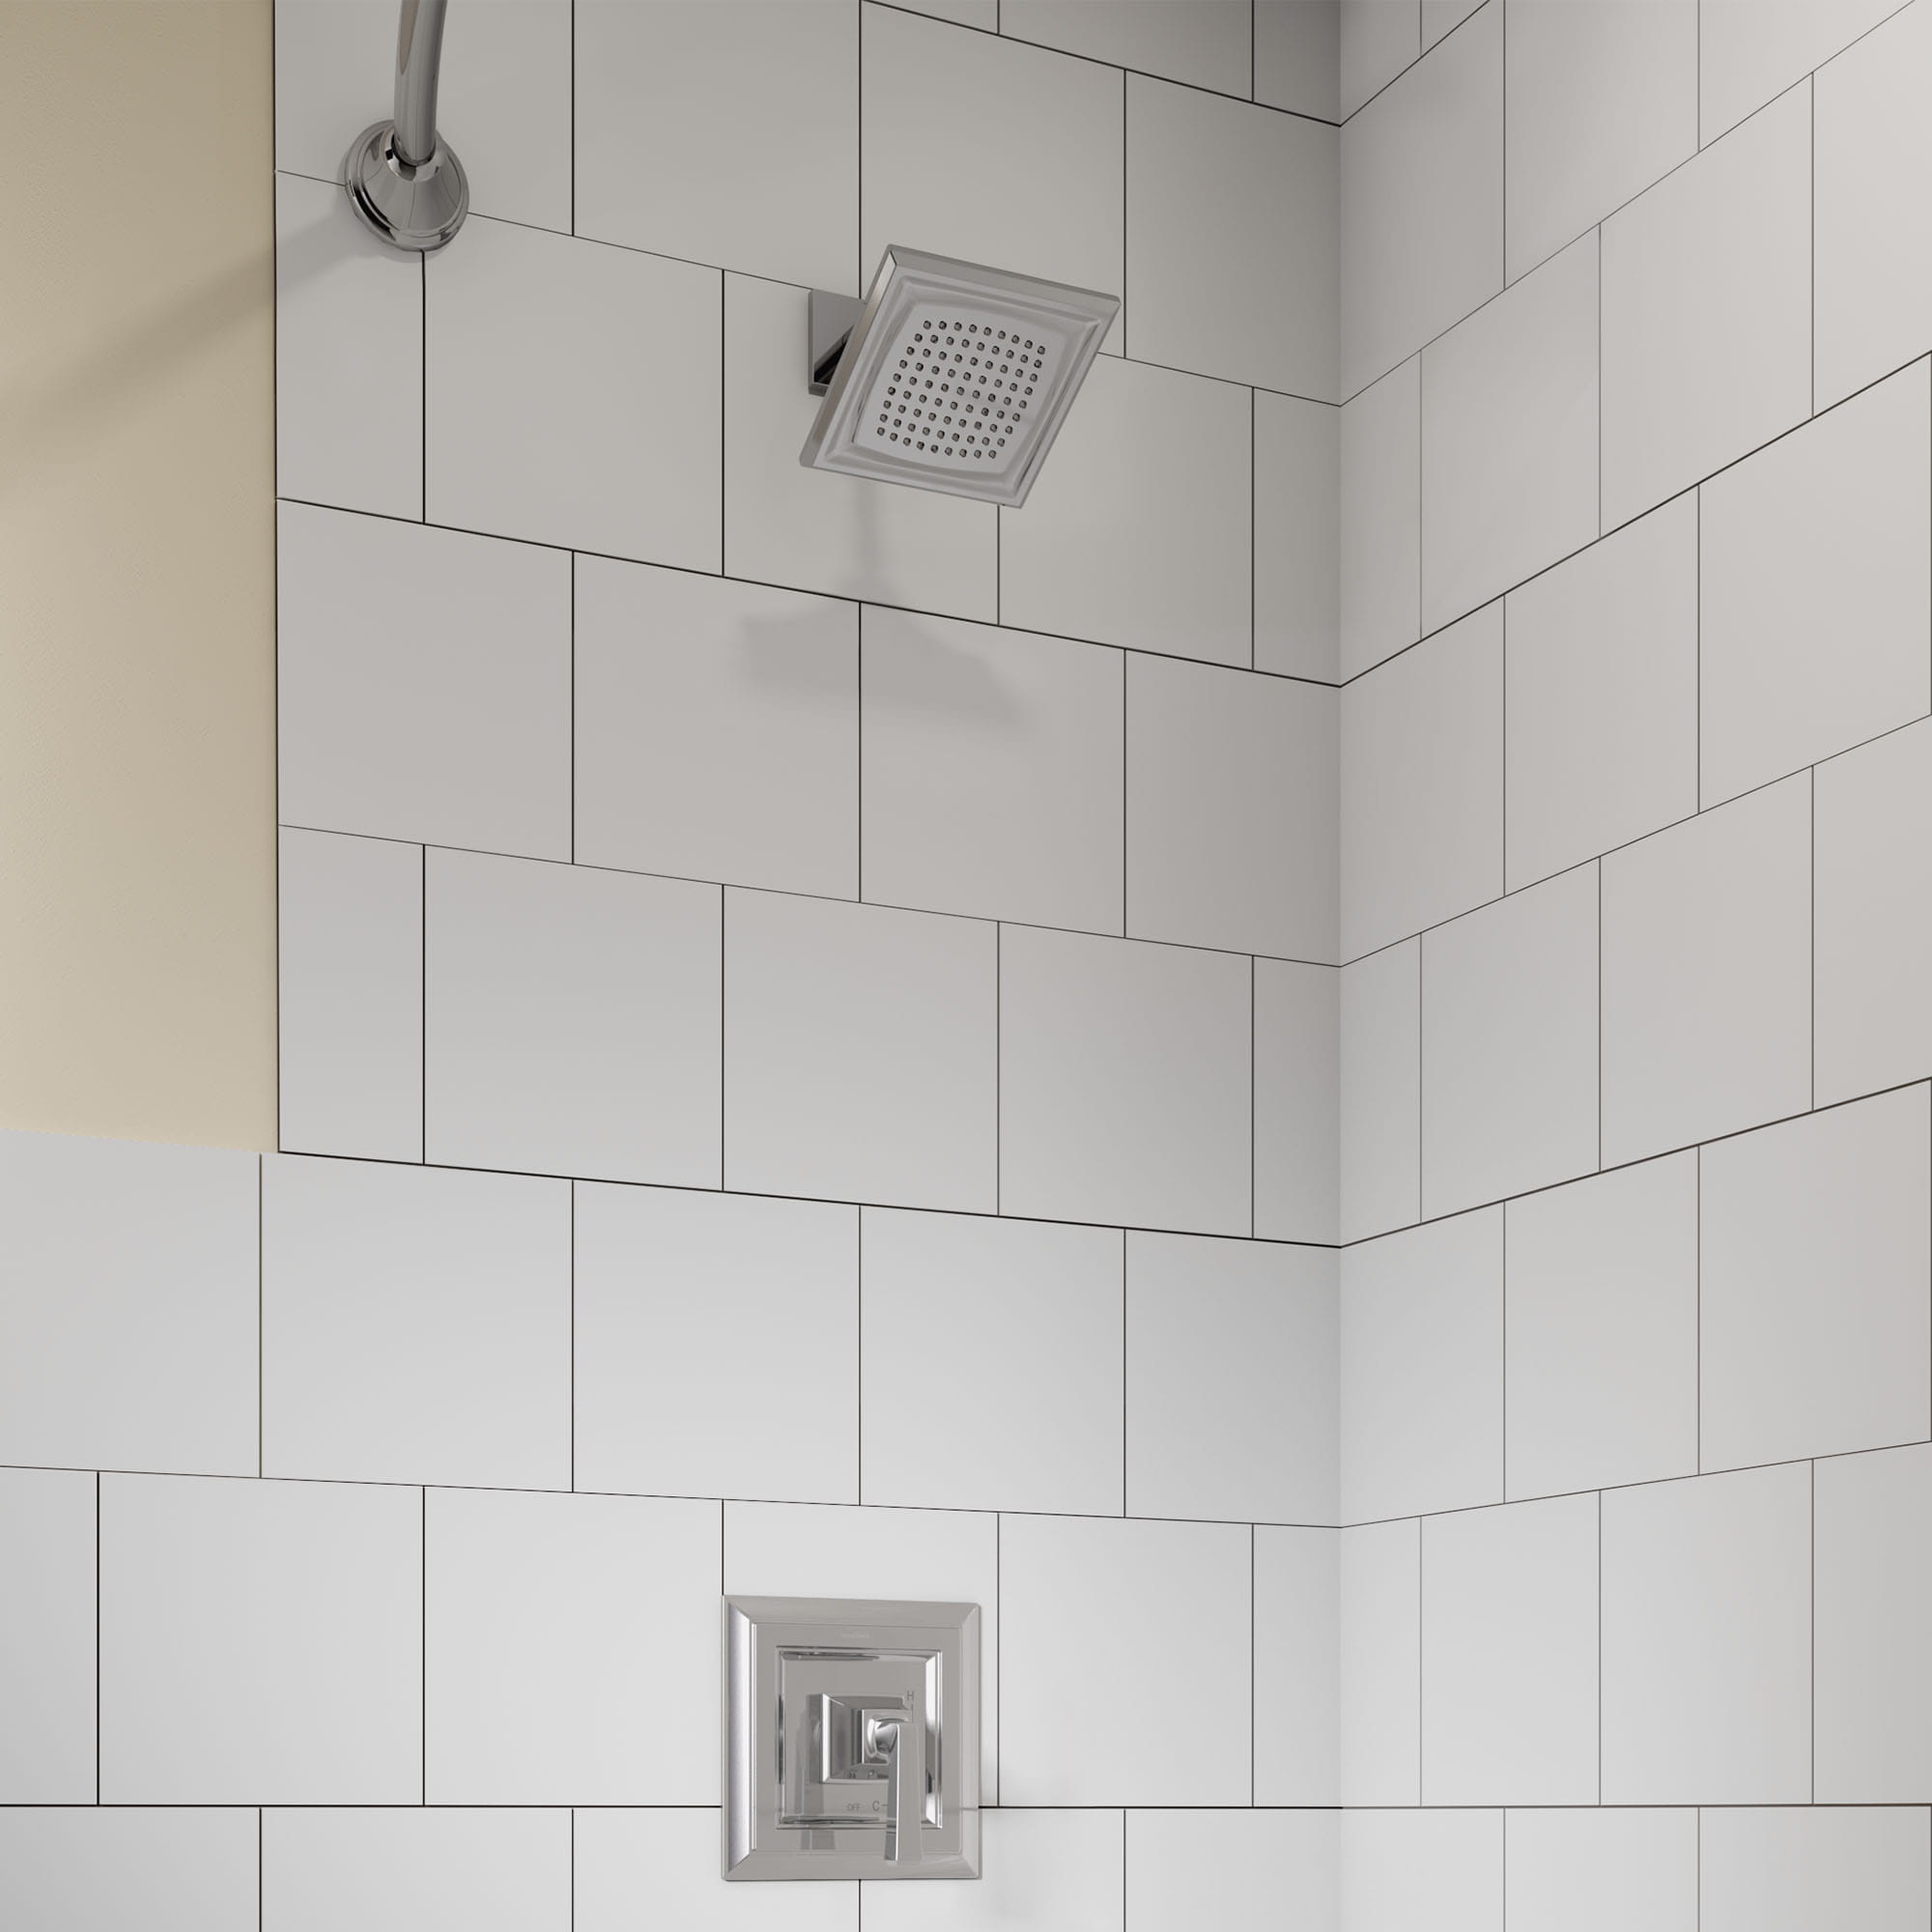 Town Square S 2.5 GPM Shower Trim Kit with Lever Handle